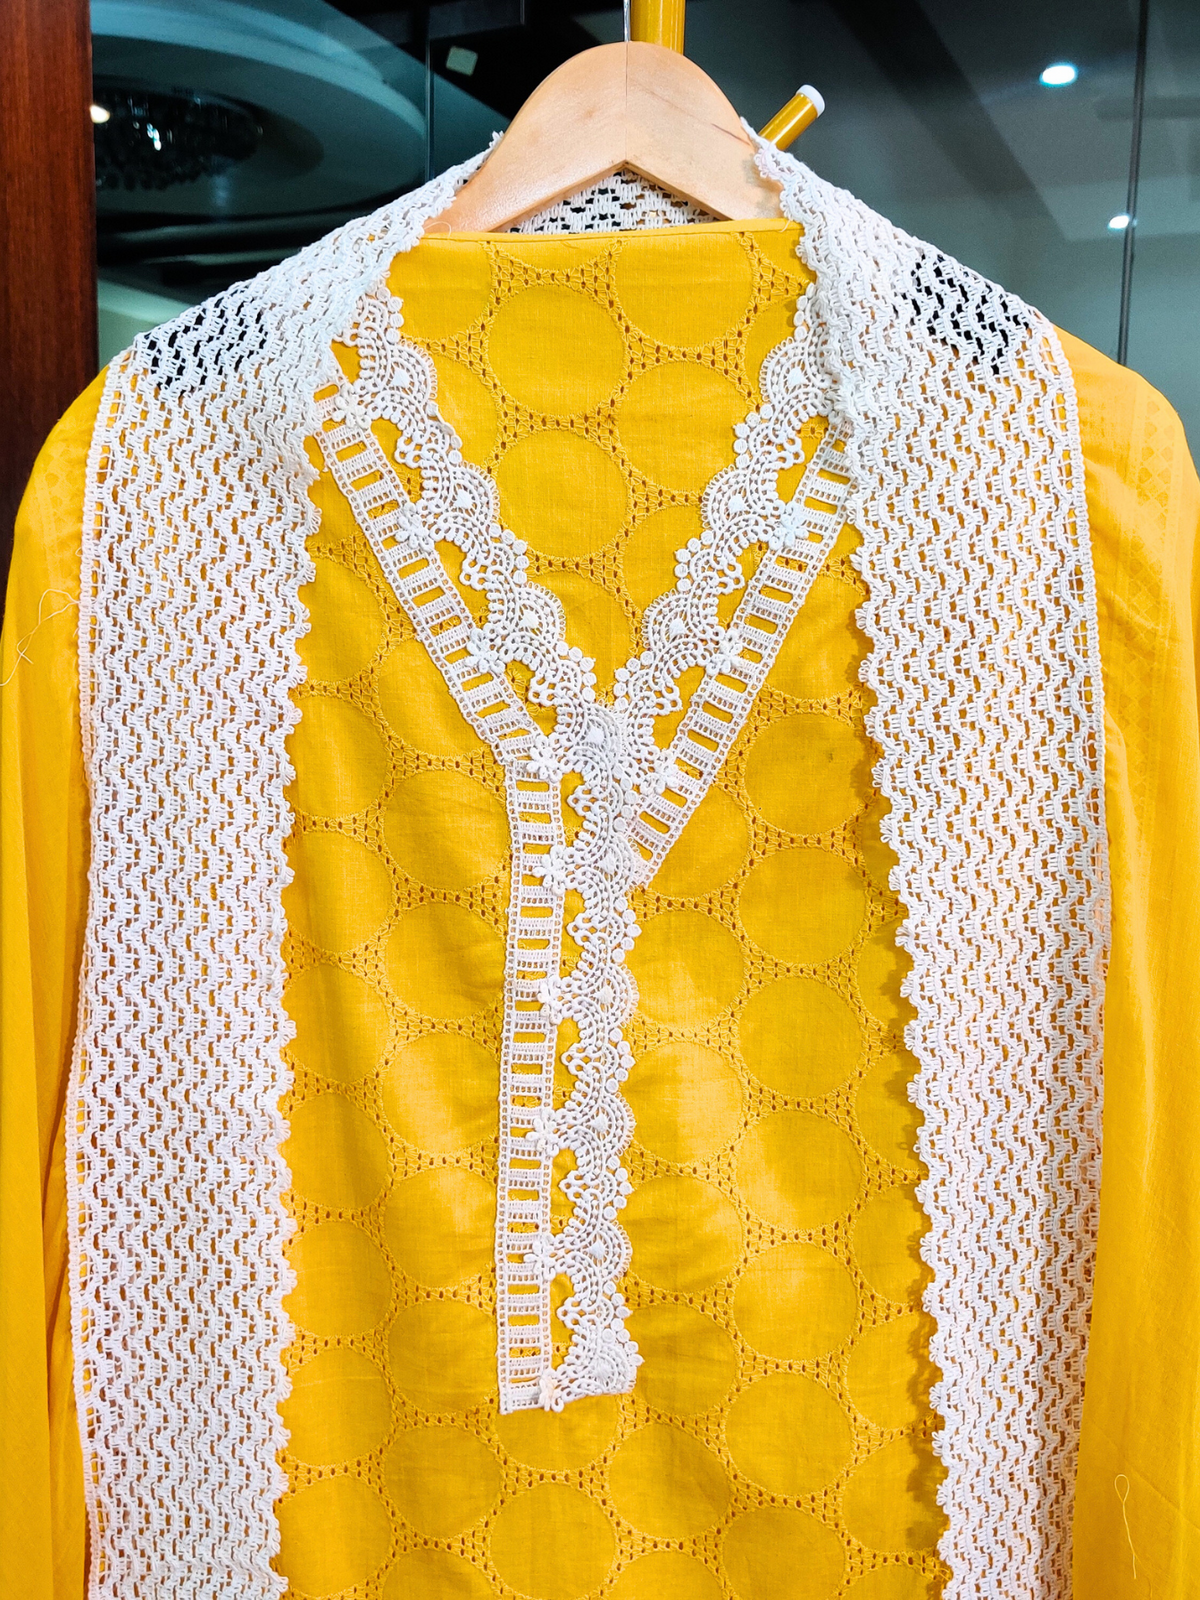 Yellow Schiffli Unstitched Dress Material Suit Set with Delicate White Lace Accents